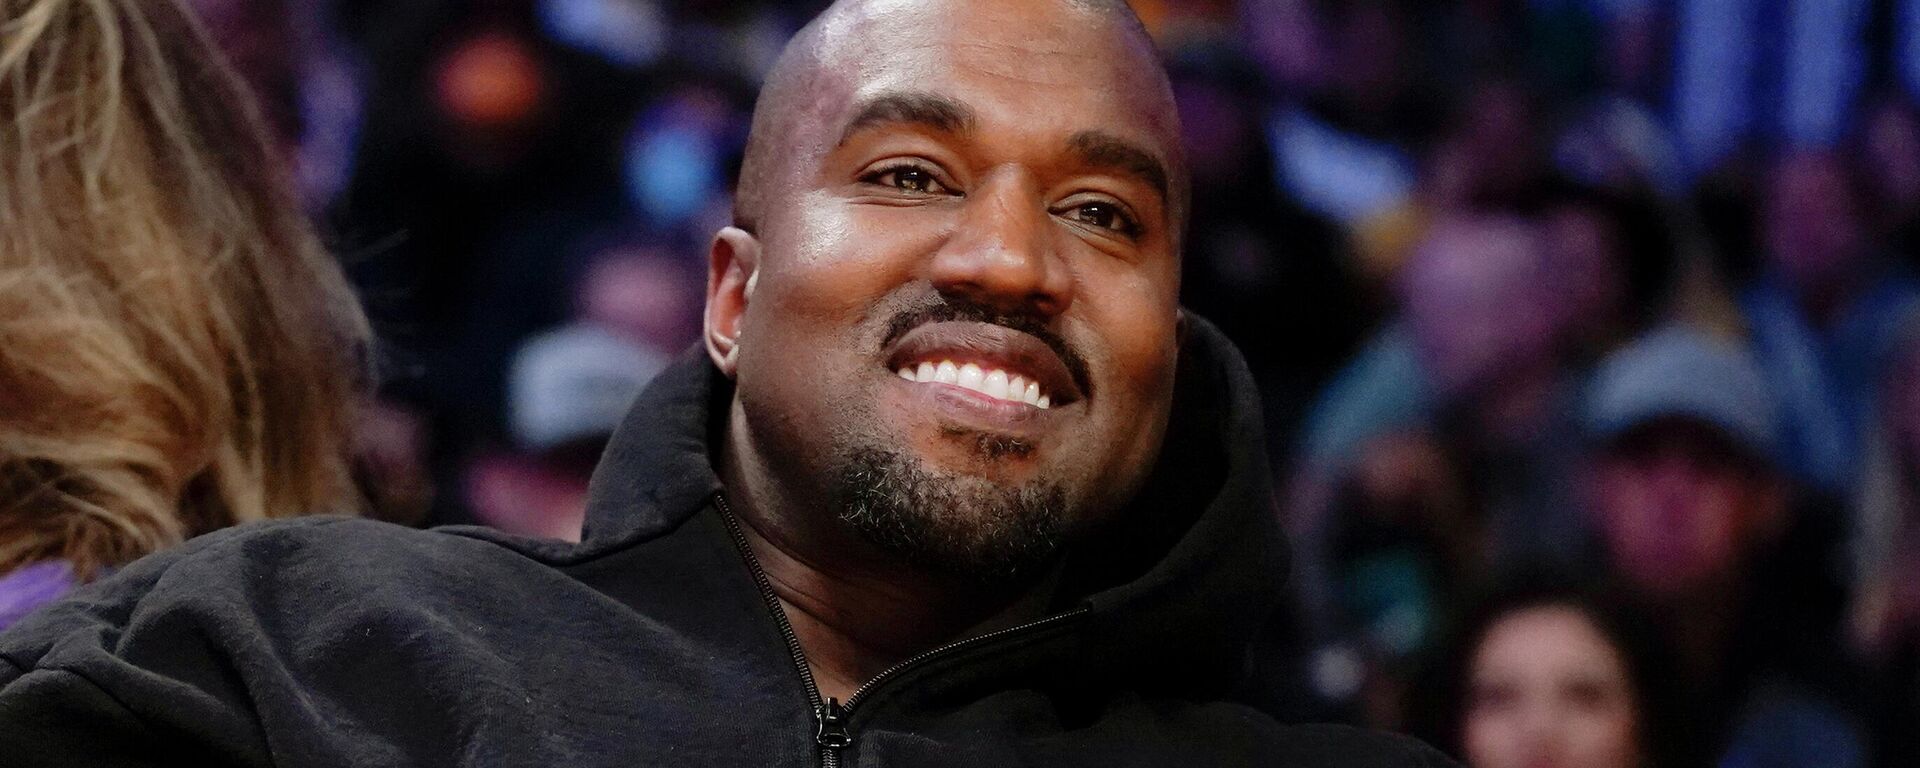 Ye watches the first half of an NBA basketball game between the Washington Wizards and the Los Angeles Lakers in Los Angeles, on March 11, 2022. A completed documentary about the rapper formerly known as Kanye West has been shelved amid his recent slew of antisemitic remarks. - Sputnik International, 1920, 02.12.2022